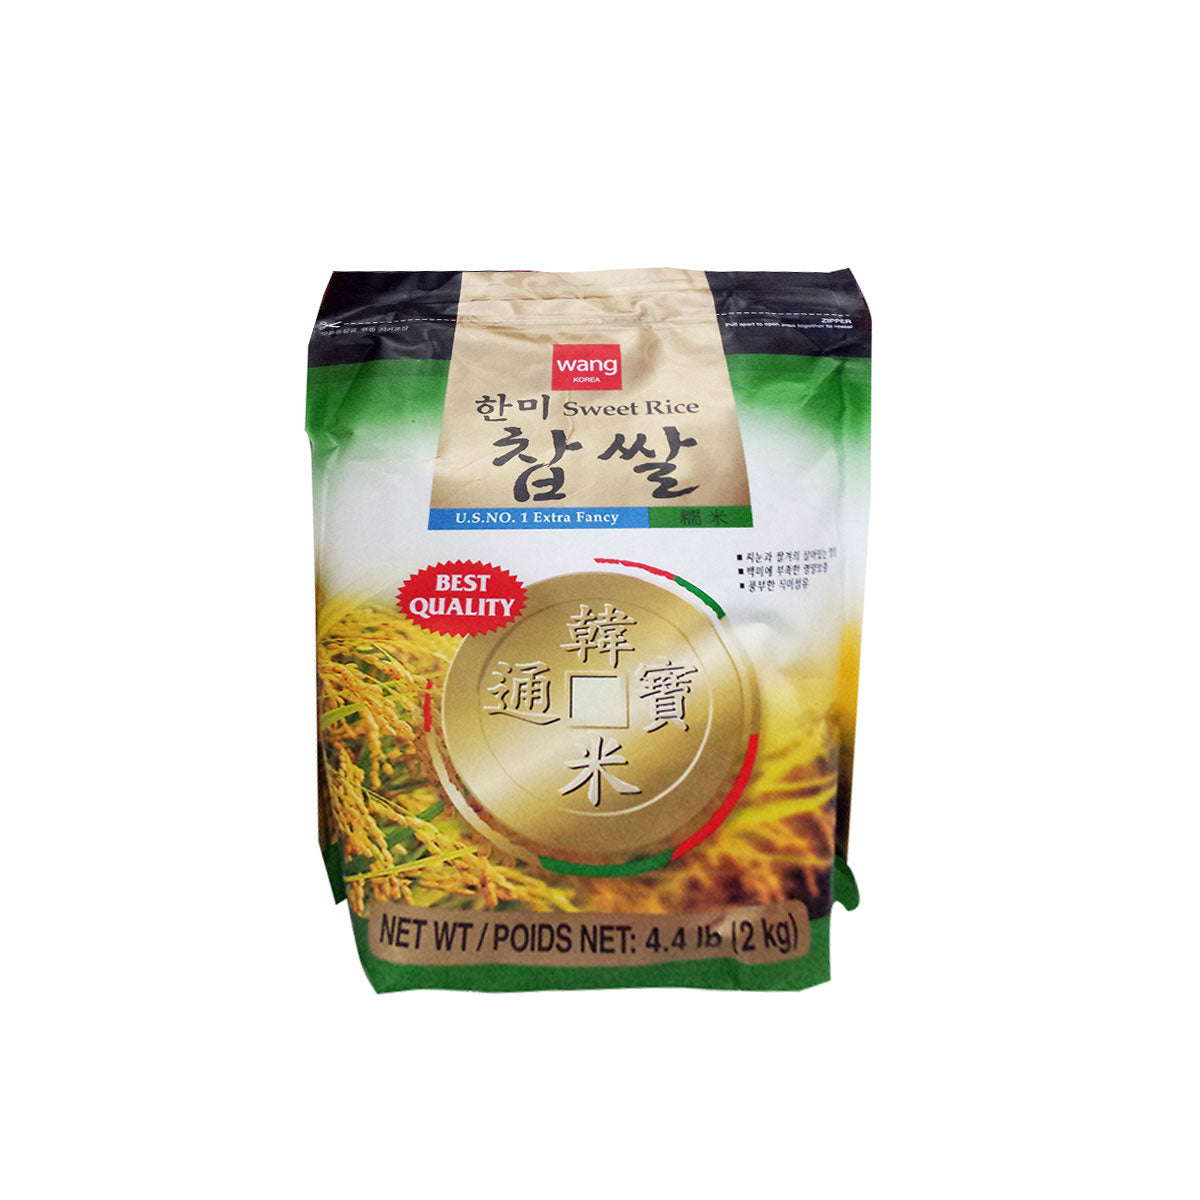 Glutinous Rice In Pack 10/5Lbs 찹쌀